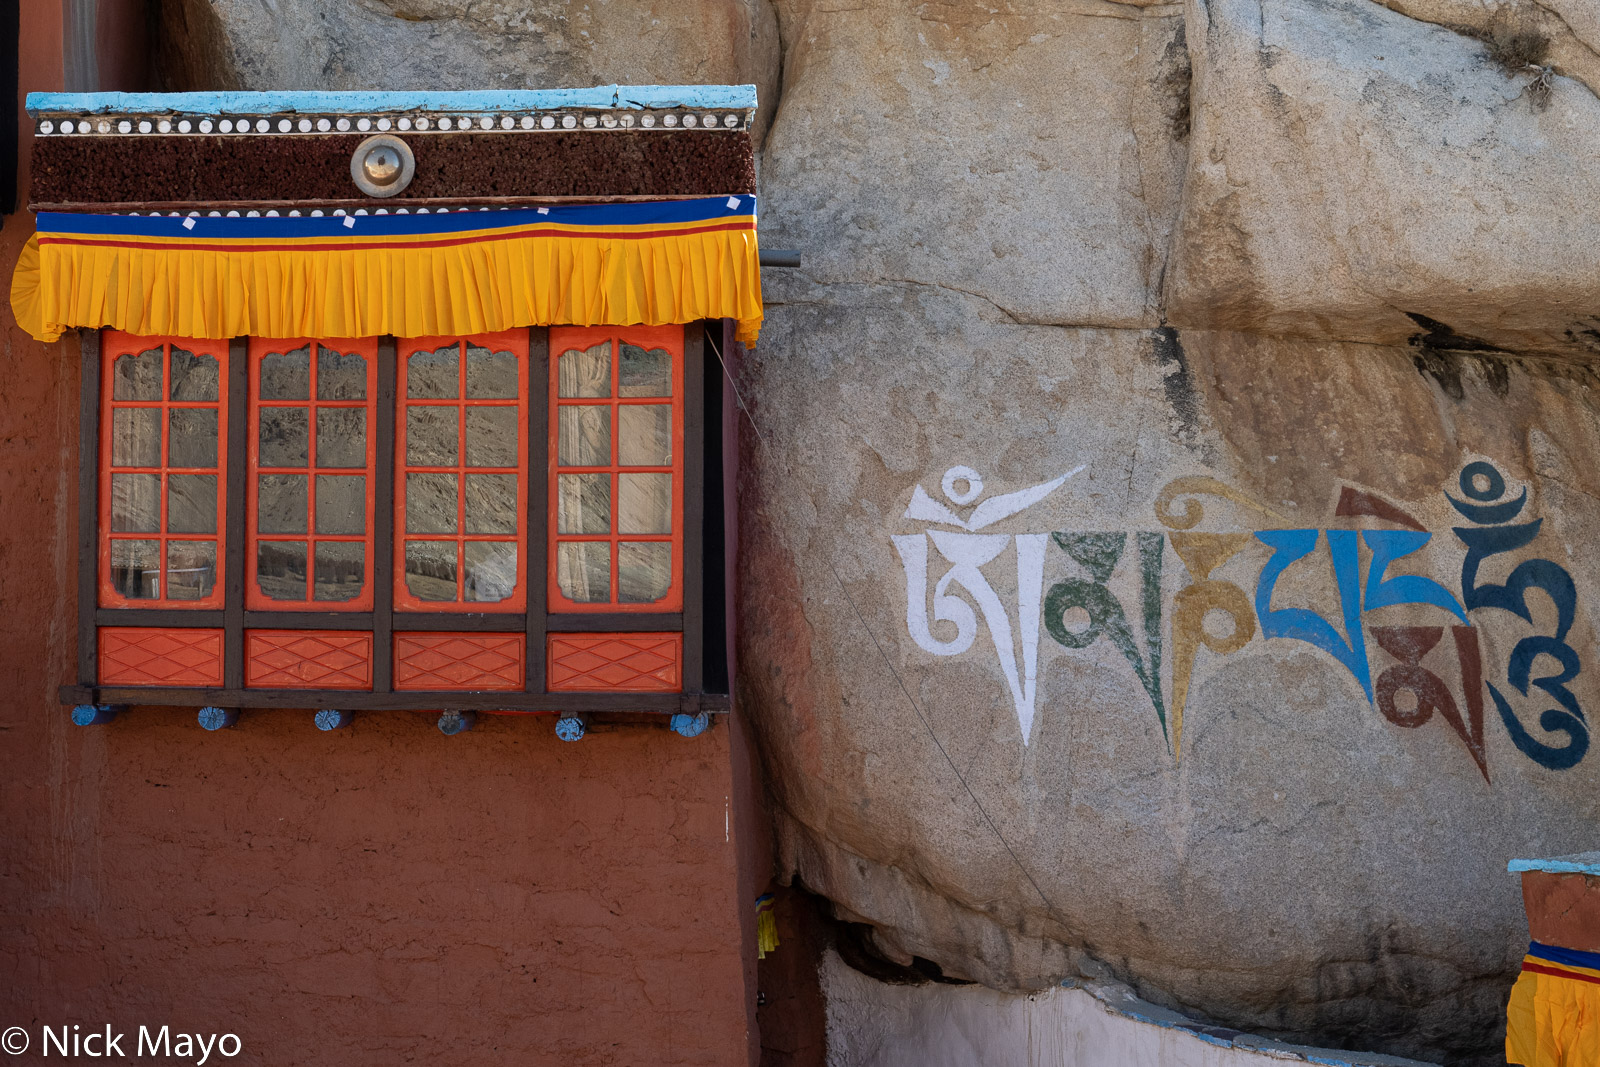 The mantra at the heart of many Buddhist traditions, Om Mani Padme Hum, painted on a rock at the Takthok monastery in Sakti.